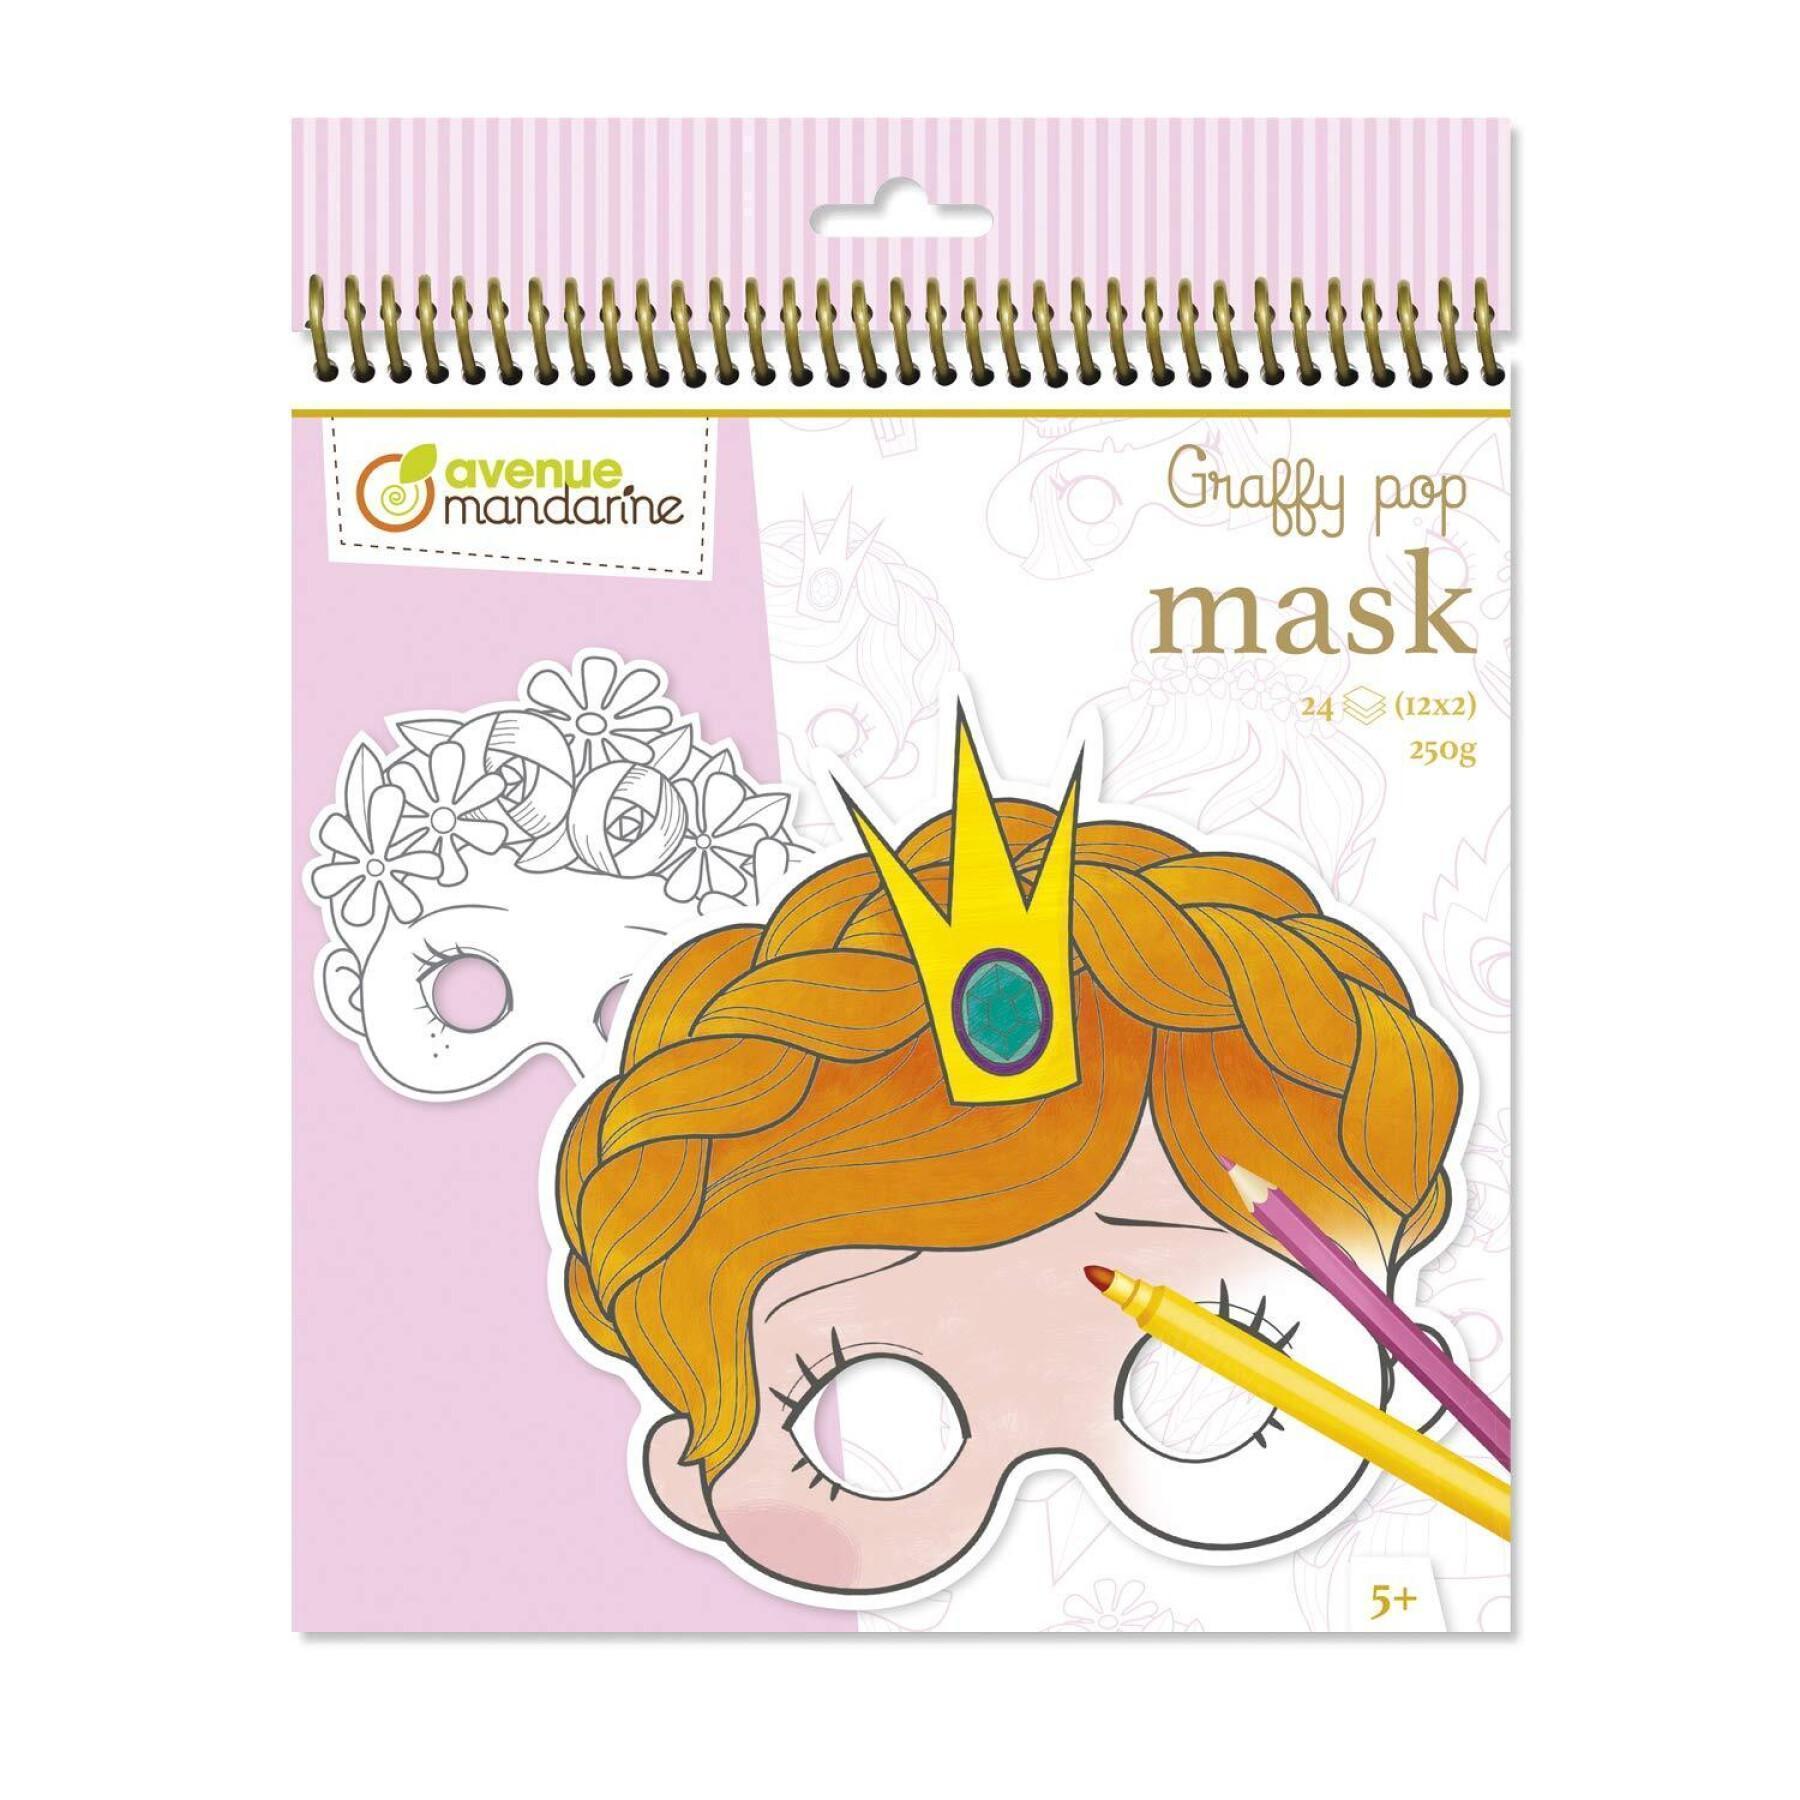 24 sheets of masks to color and cut out for girls Avenue Mandarine Graffy Pop Mask